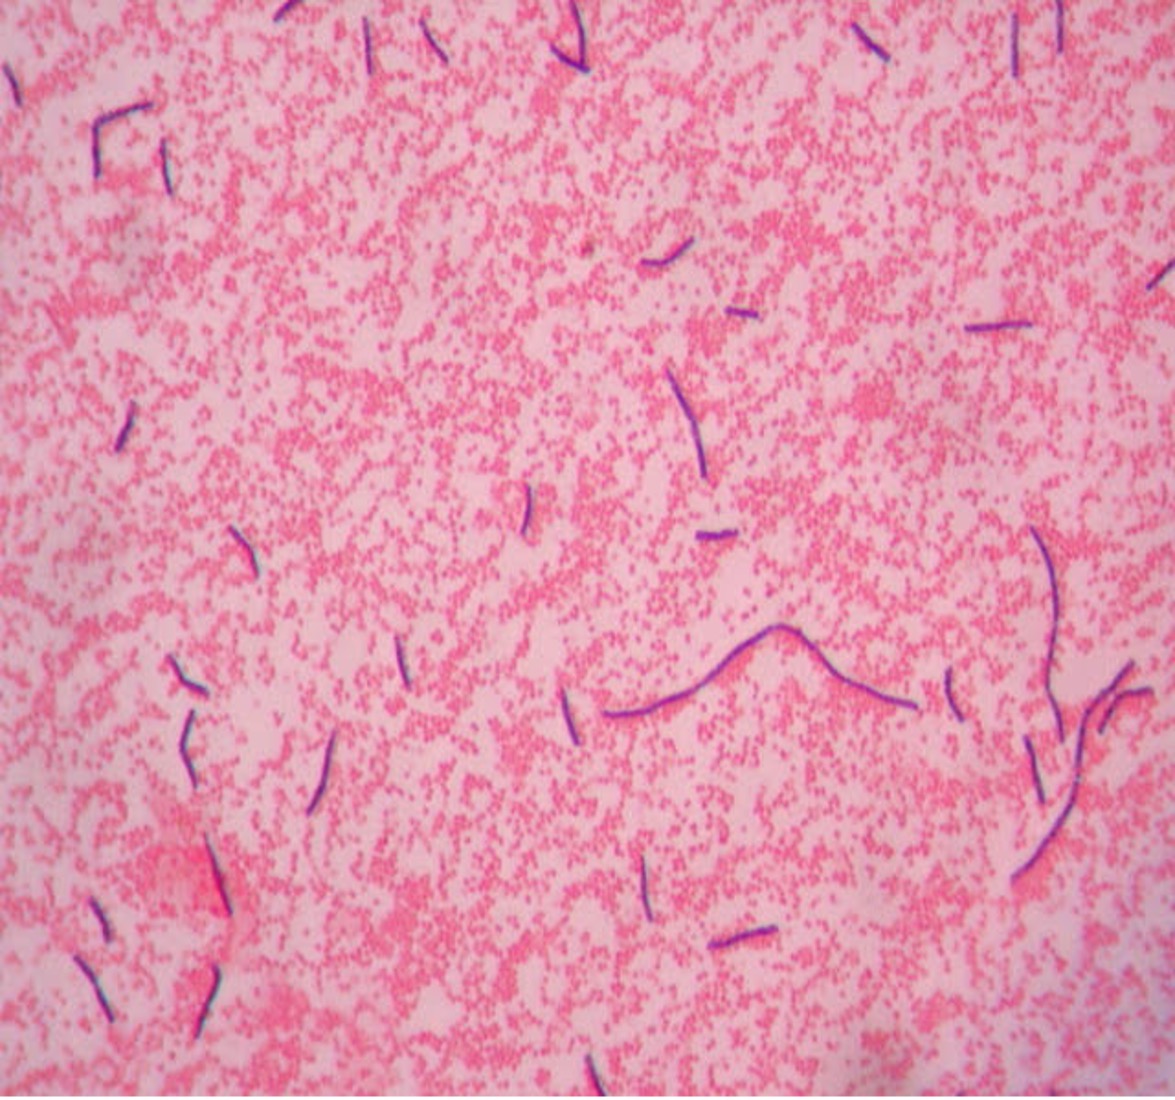 Exercise 9.6 Gram stain - pink rounds and purple rods